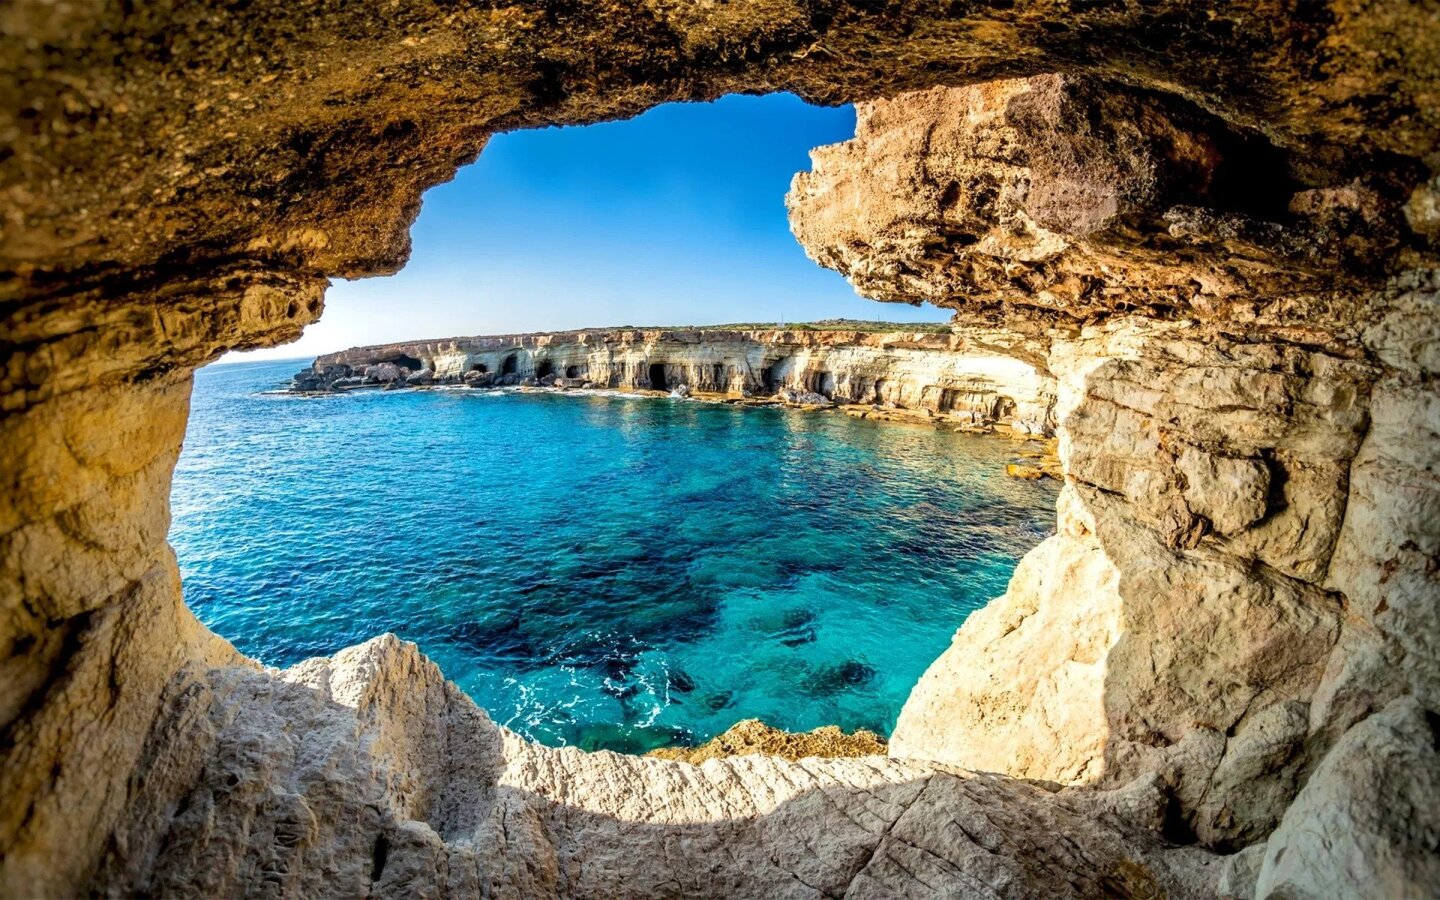 An awe-inspiring image of Cape Greco in Cyprus, showcasing its rugged coastline and clear waters. With natural sea caves, beautiful beaches, scenic hiking trails, and stunning views of the Mediterranean Sea, it's a must-visit for those seeking things to do in Cyprus.